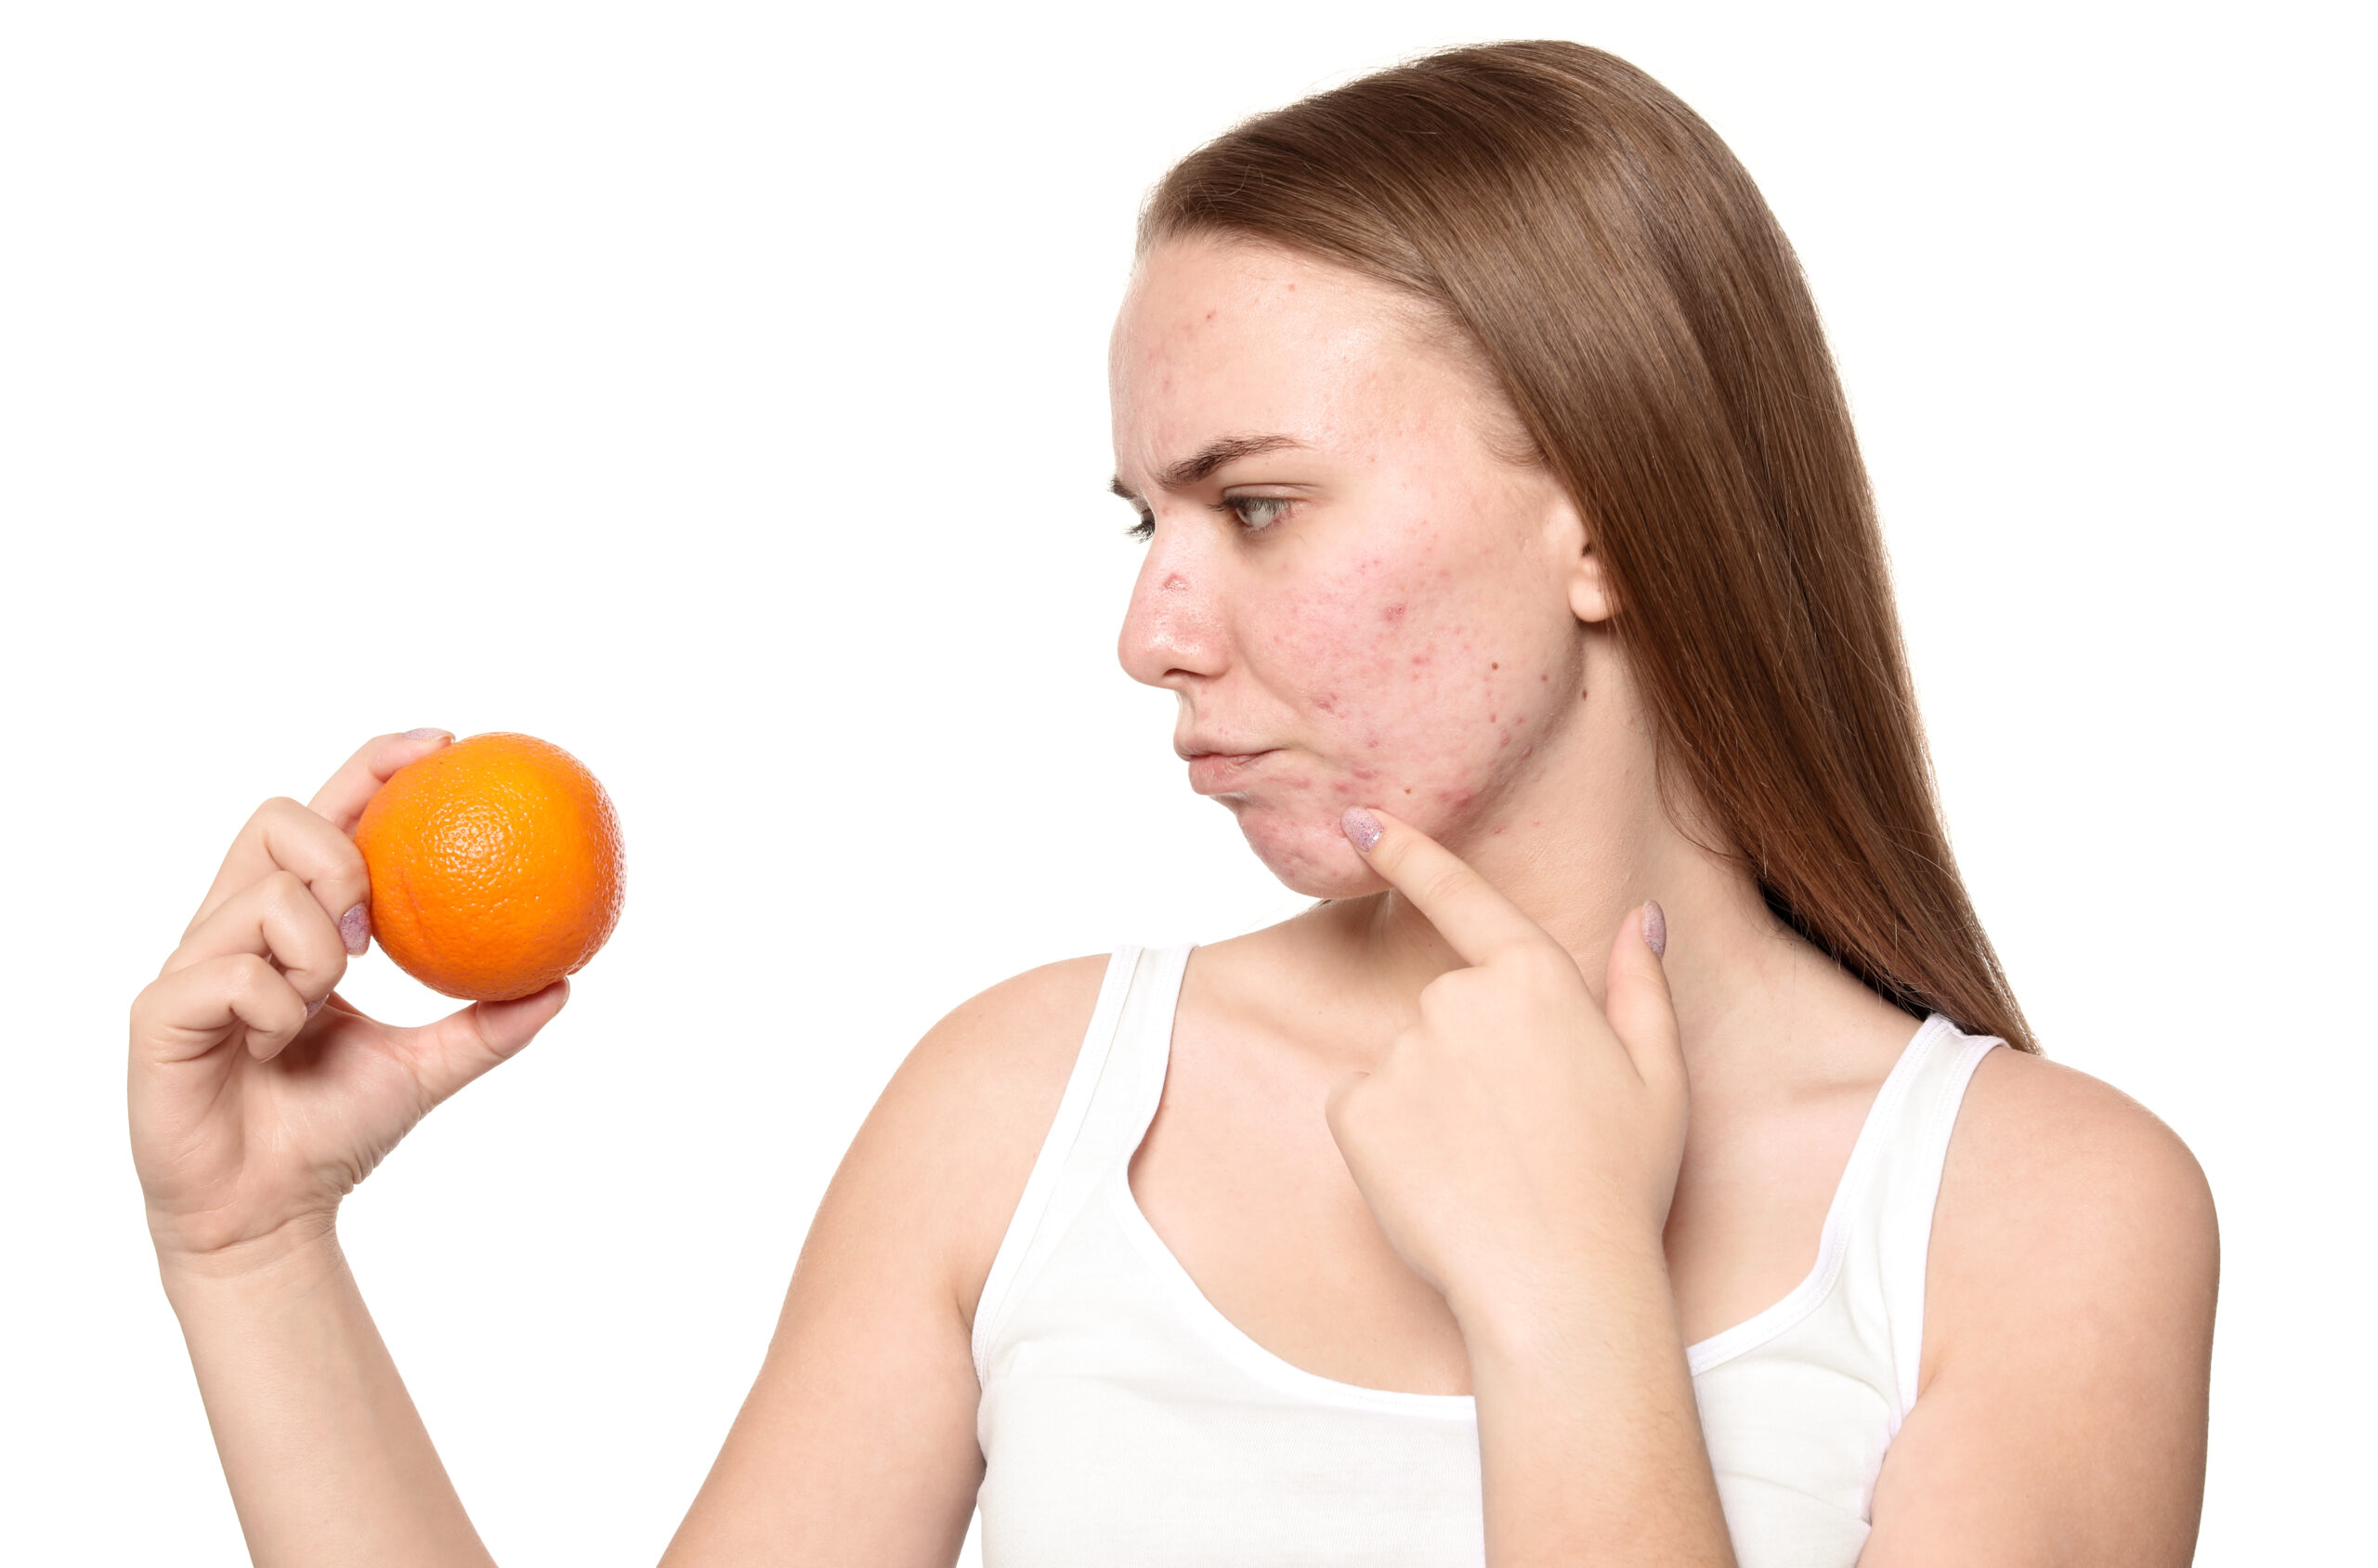 Young woman with acne problem holding orange on white background.